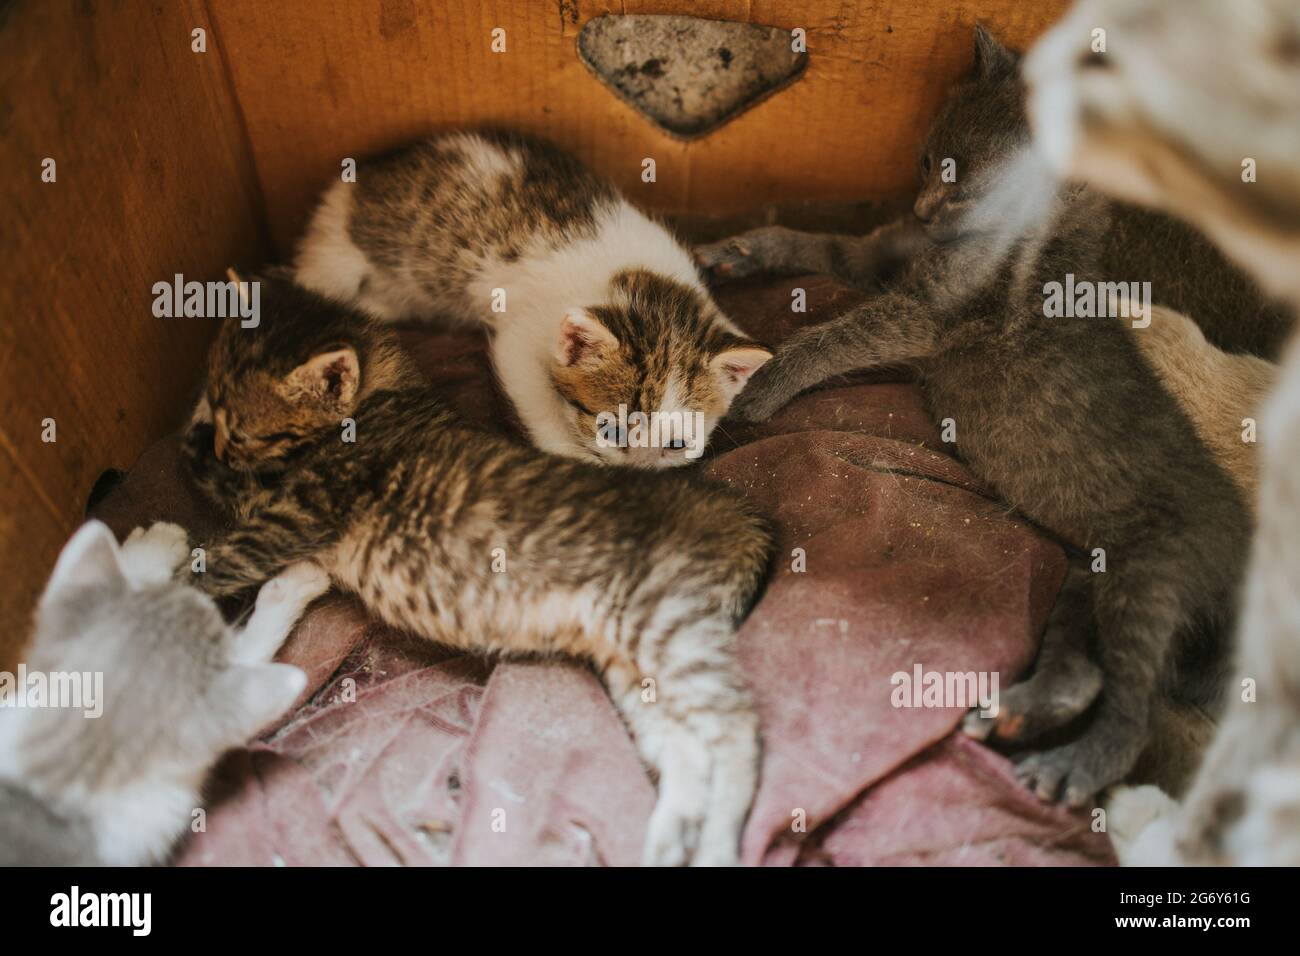 Closeup of the fluffy colorful adorable kittens on the blanket Stock Photo